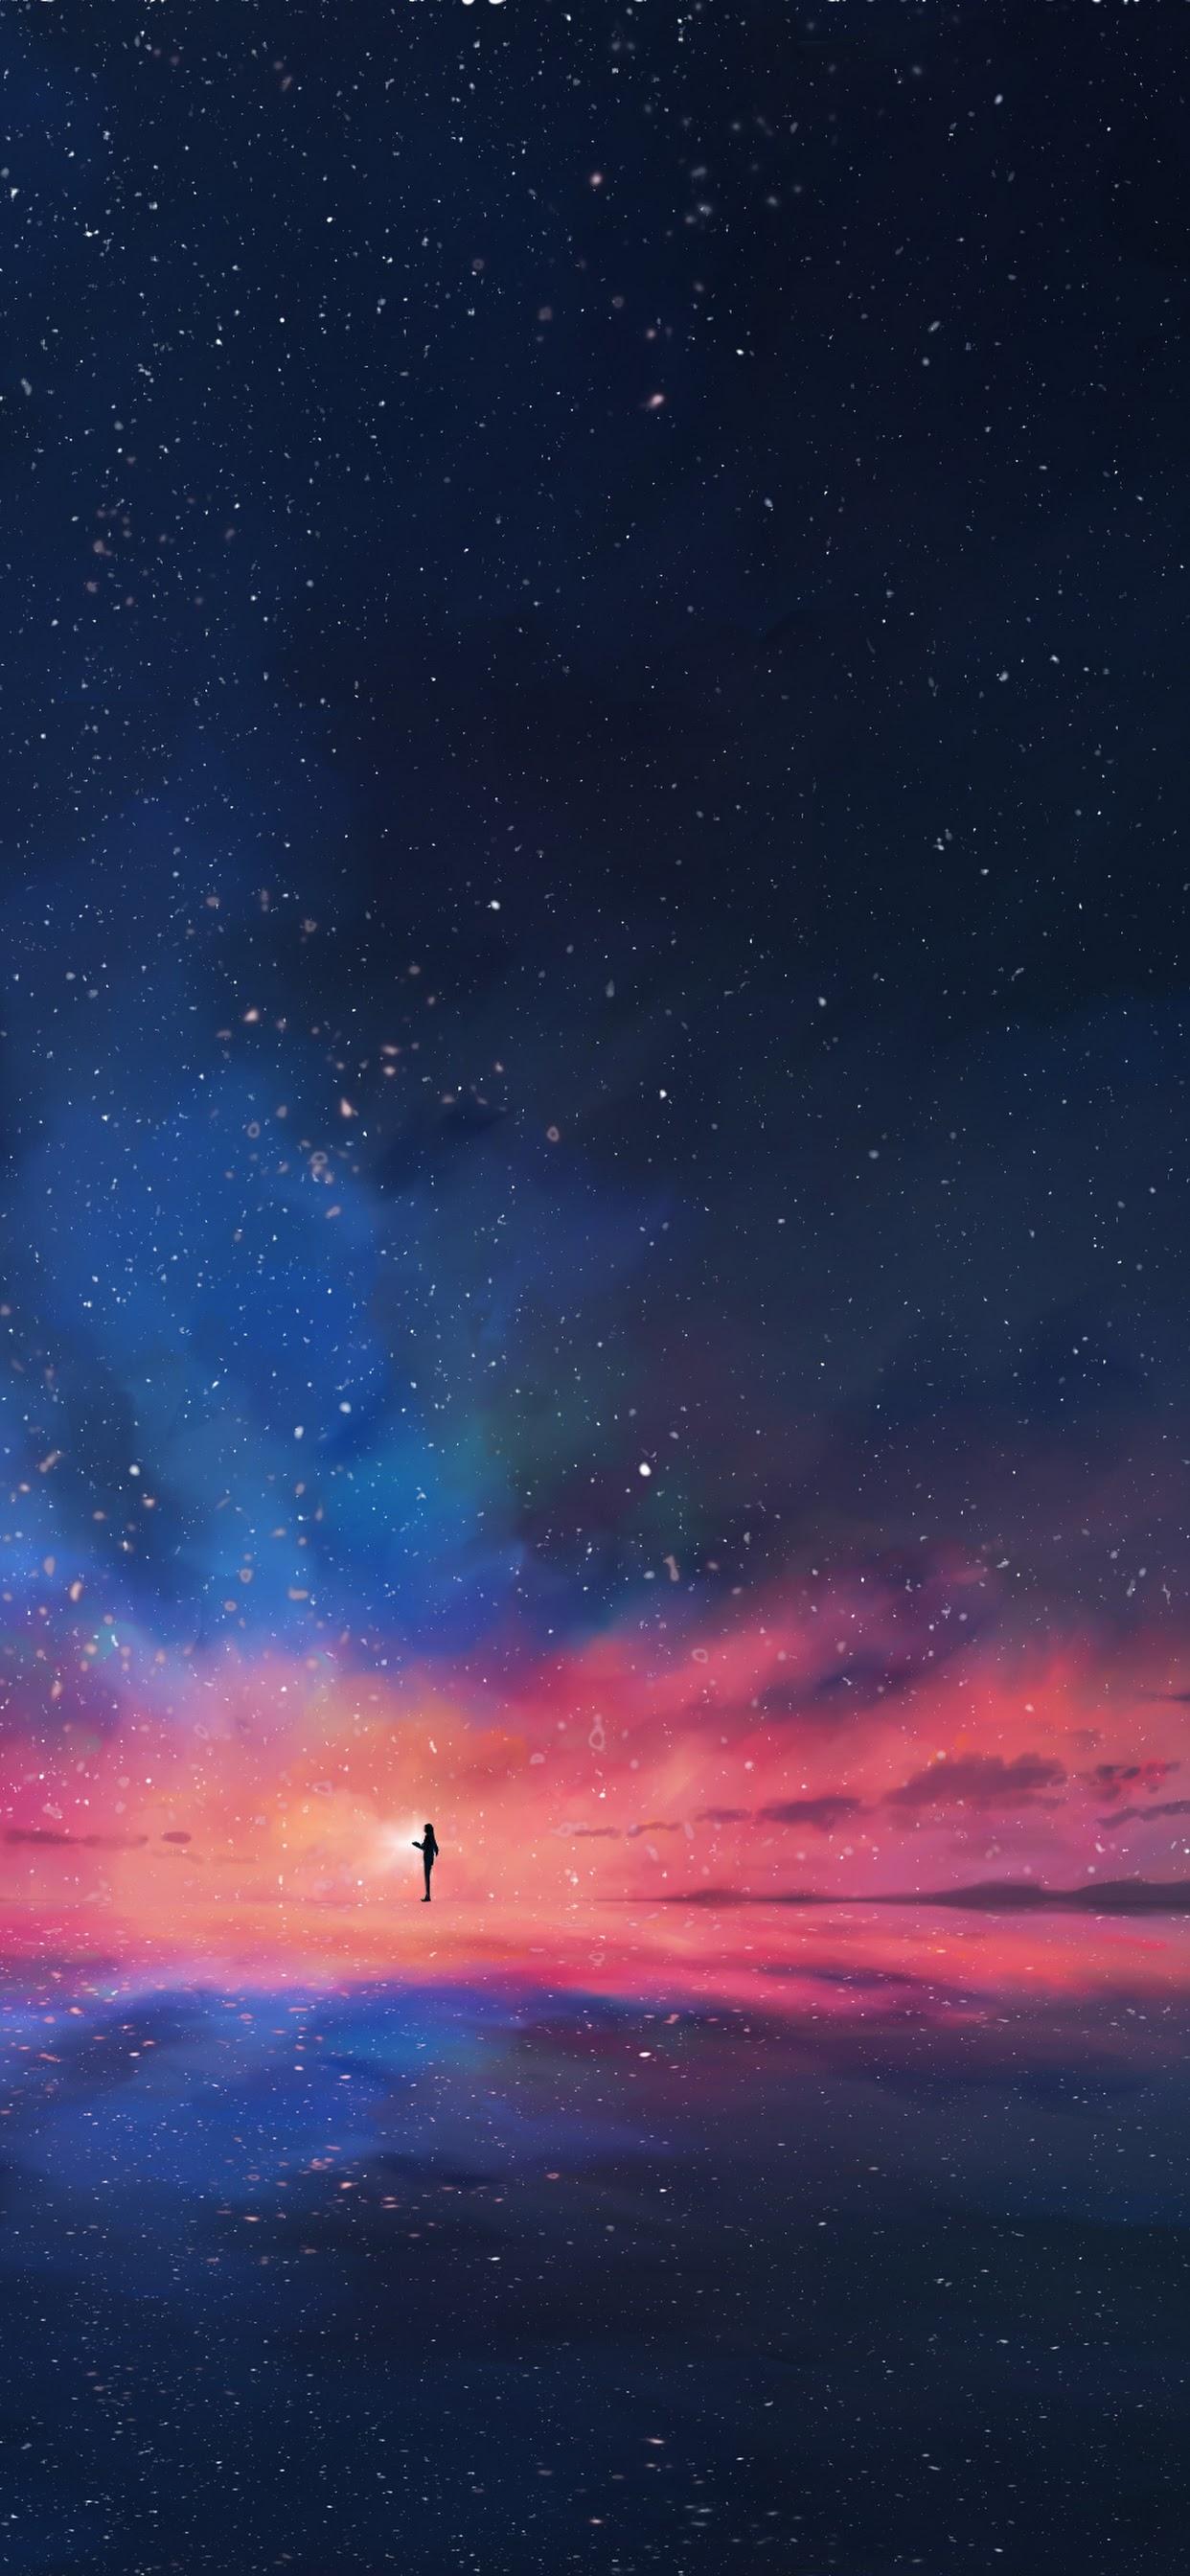 1080x1920 Anime Night Scenery Iphone 7,6s,6 Plus, Pixel xl ,One Plus 3,3t,5  HD 4k Wallpapers, Images, Backgrounds, Photos and Pictures